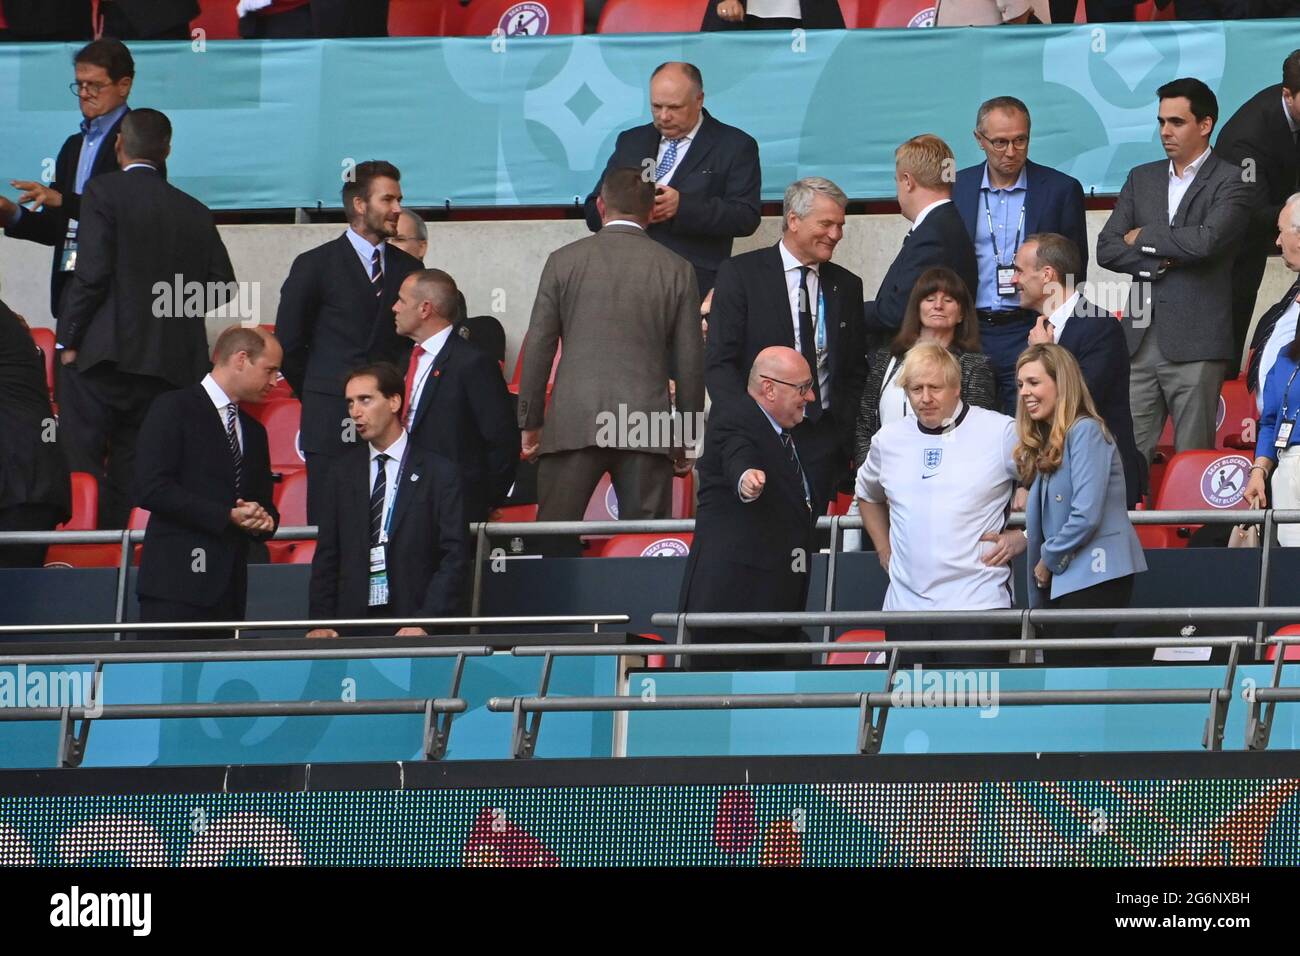 View of the VIP box, in the withte Prime Minister Boris JOHNSON with his wife Carrie SYMONDS, left Prince WILLIAM, feature, symbol photo, edge motif, semi-finals, game M50, England (ENG)